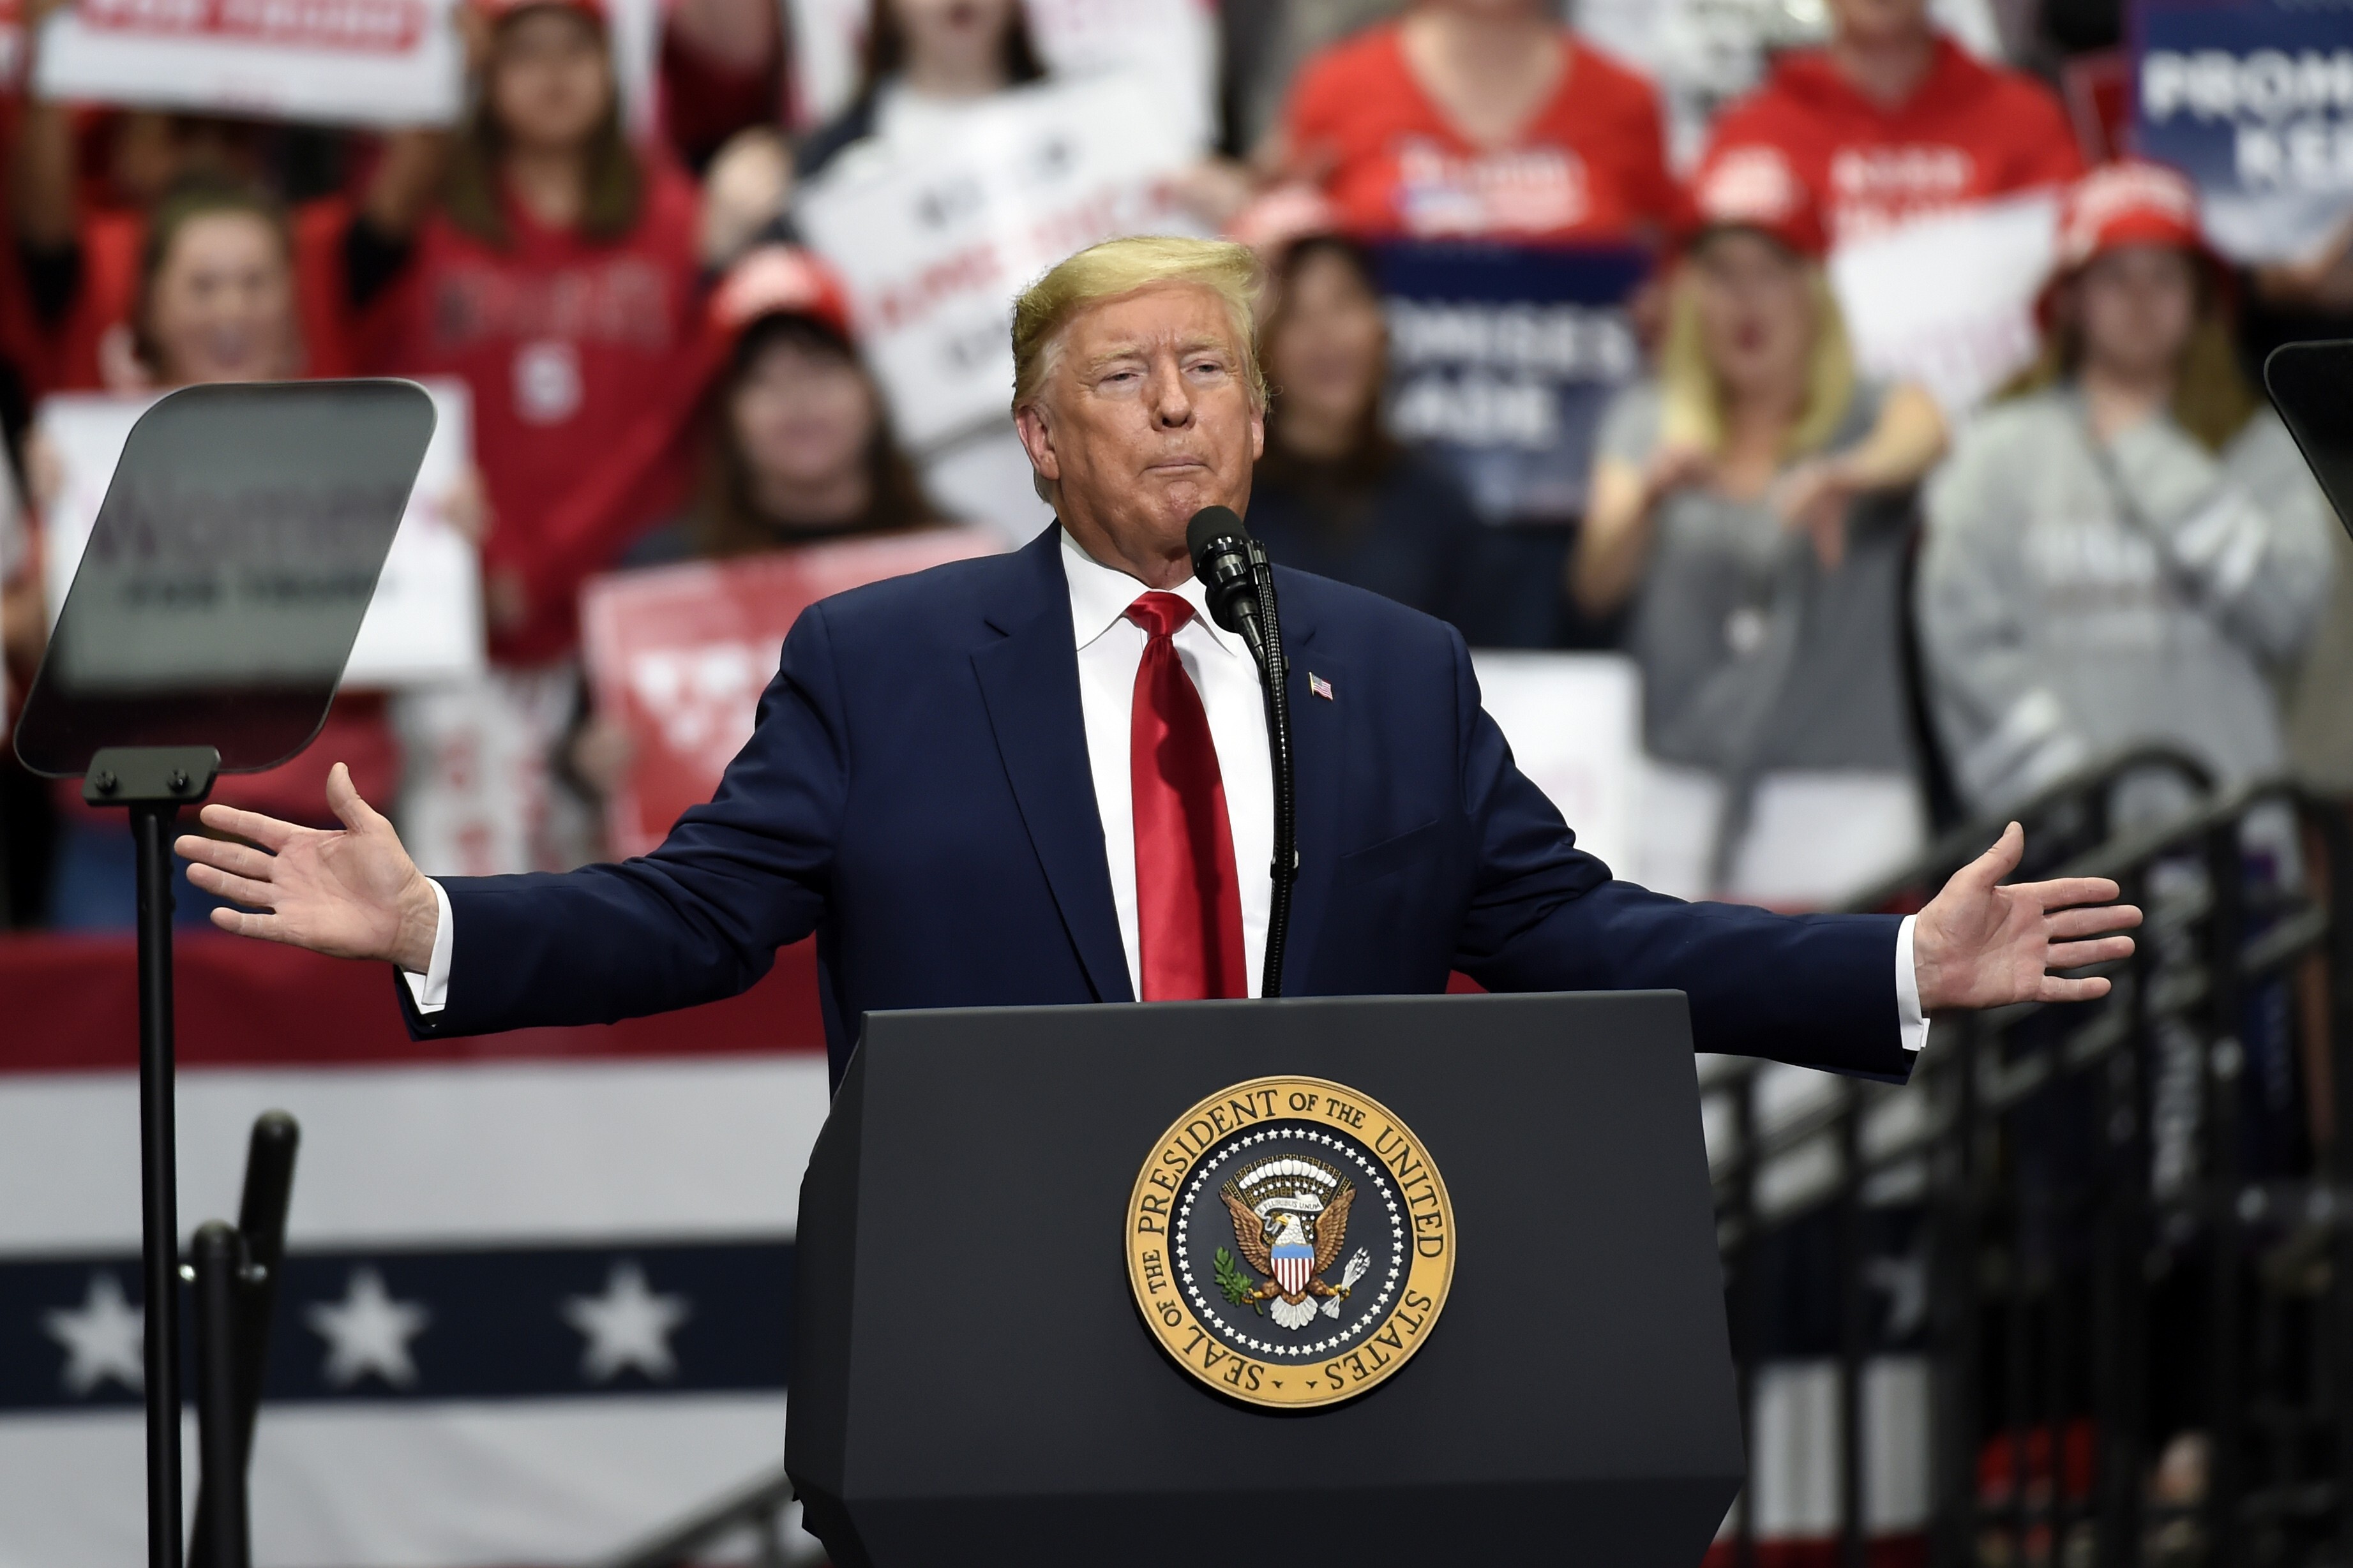 US President Donald Trump speaks during a campaign rally in Charlotte, North Carolina on March 2. Anti-China rhetoric is expected to spike further in the run-up to the US presidential election. Photo: AP